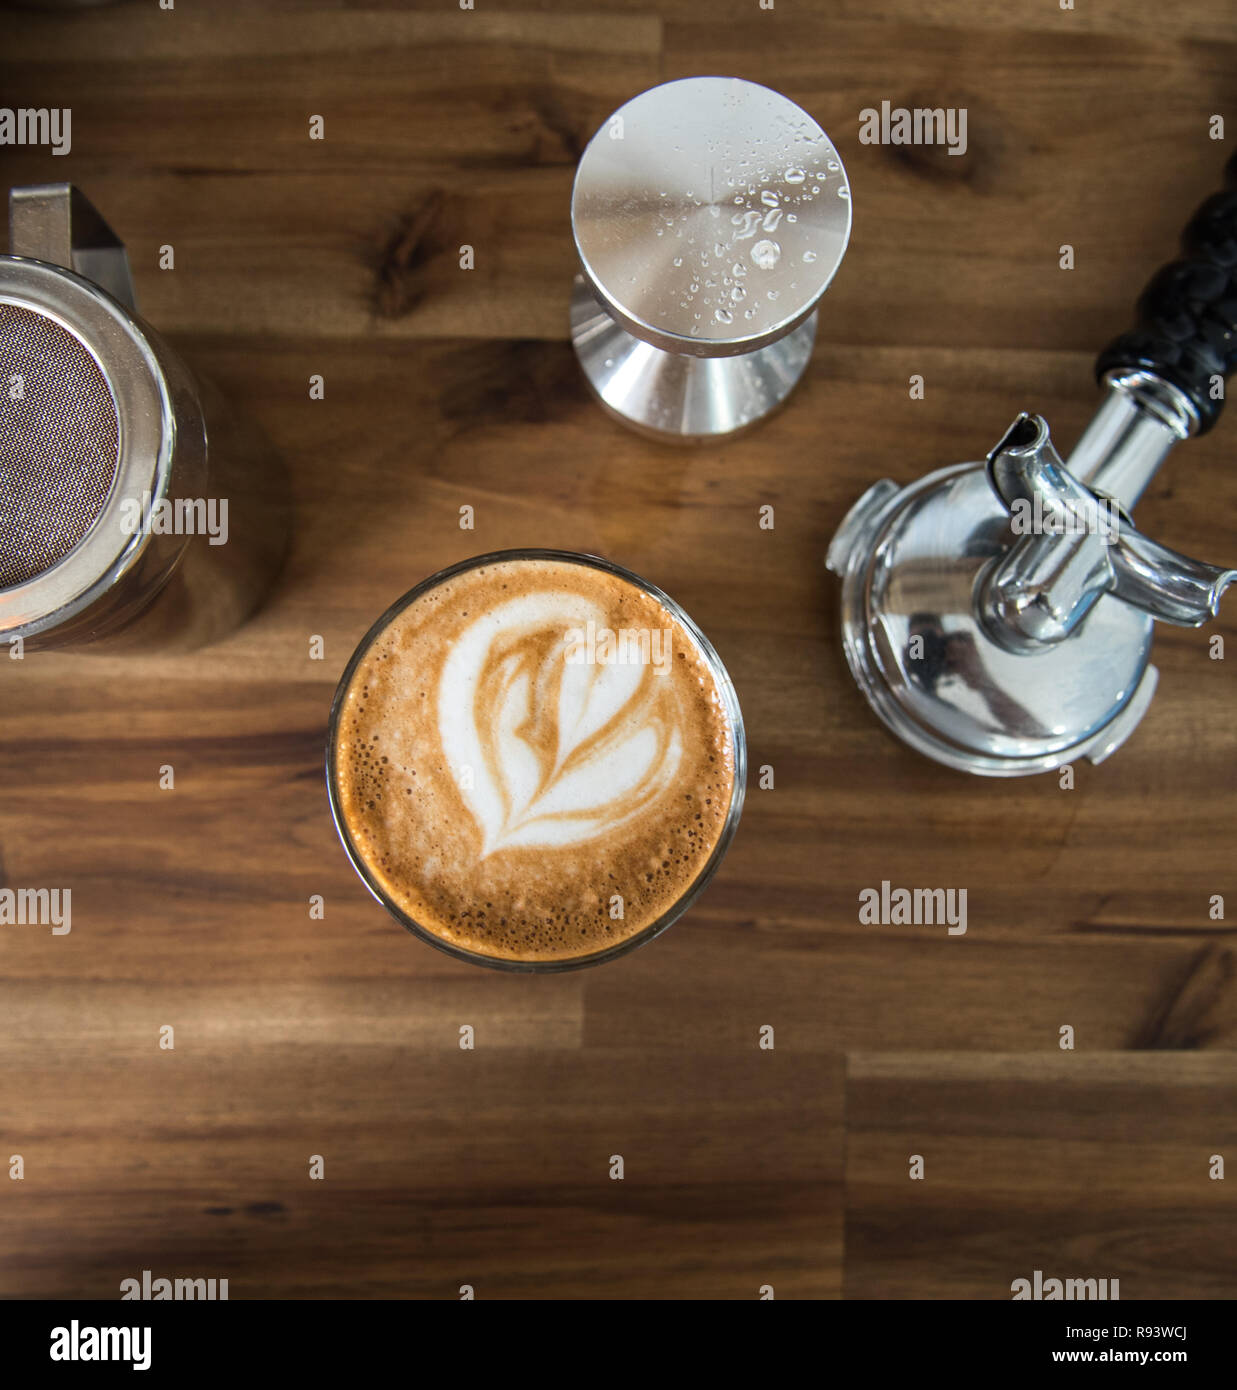 Coffee latte art on a bench with coffee machine tools around it. Cafe latte with a heart on it, beautiful warm drink Stock Photo